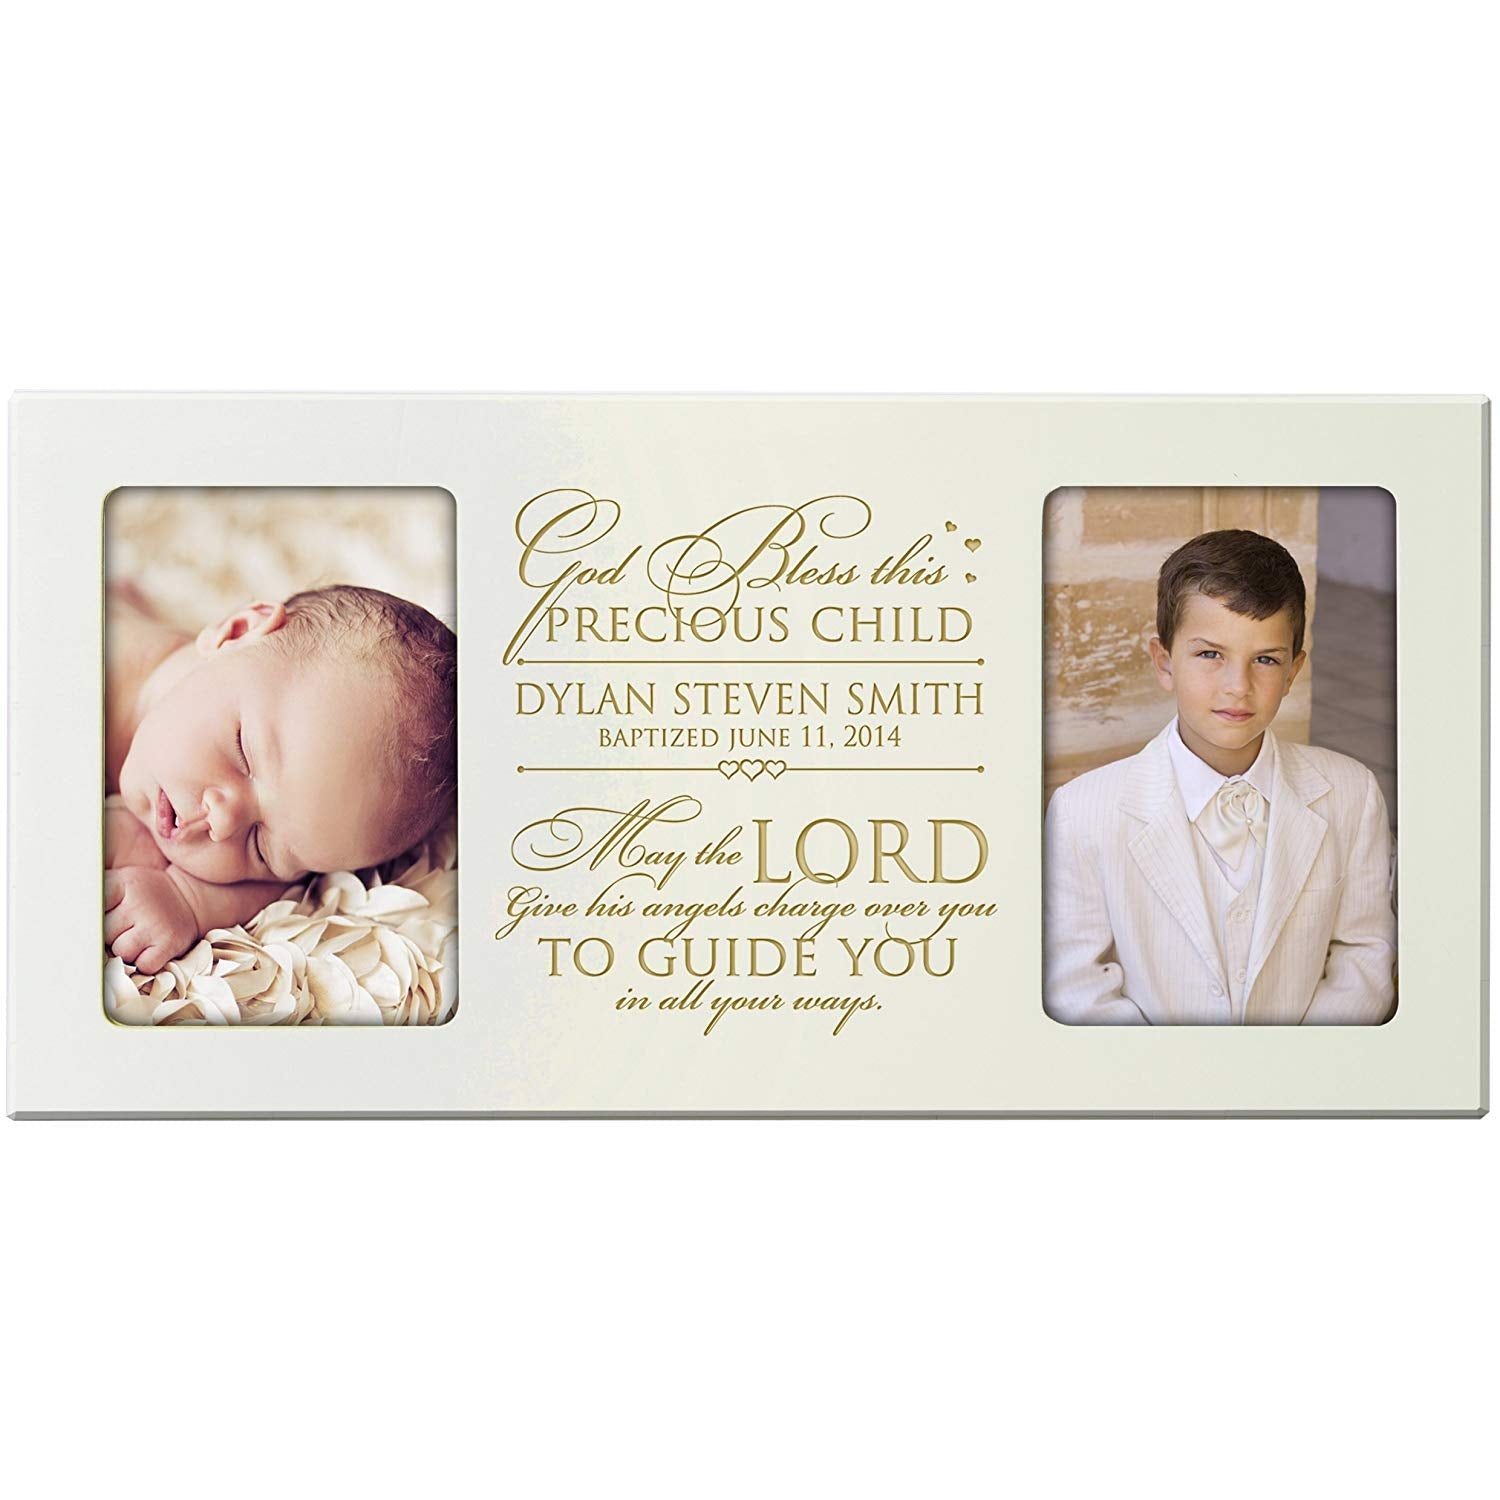 Personalized First Communion Photo Frame Gift "Precious Child" - LifeSong Milestones